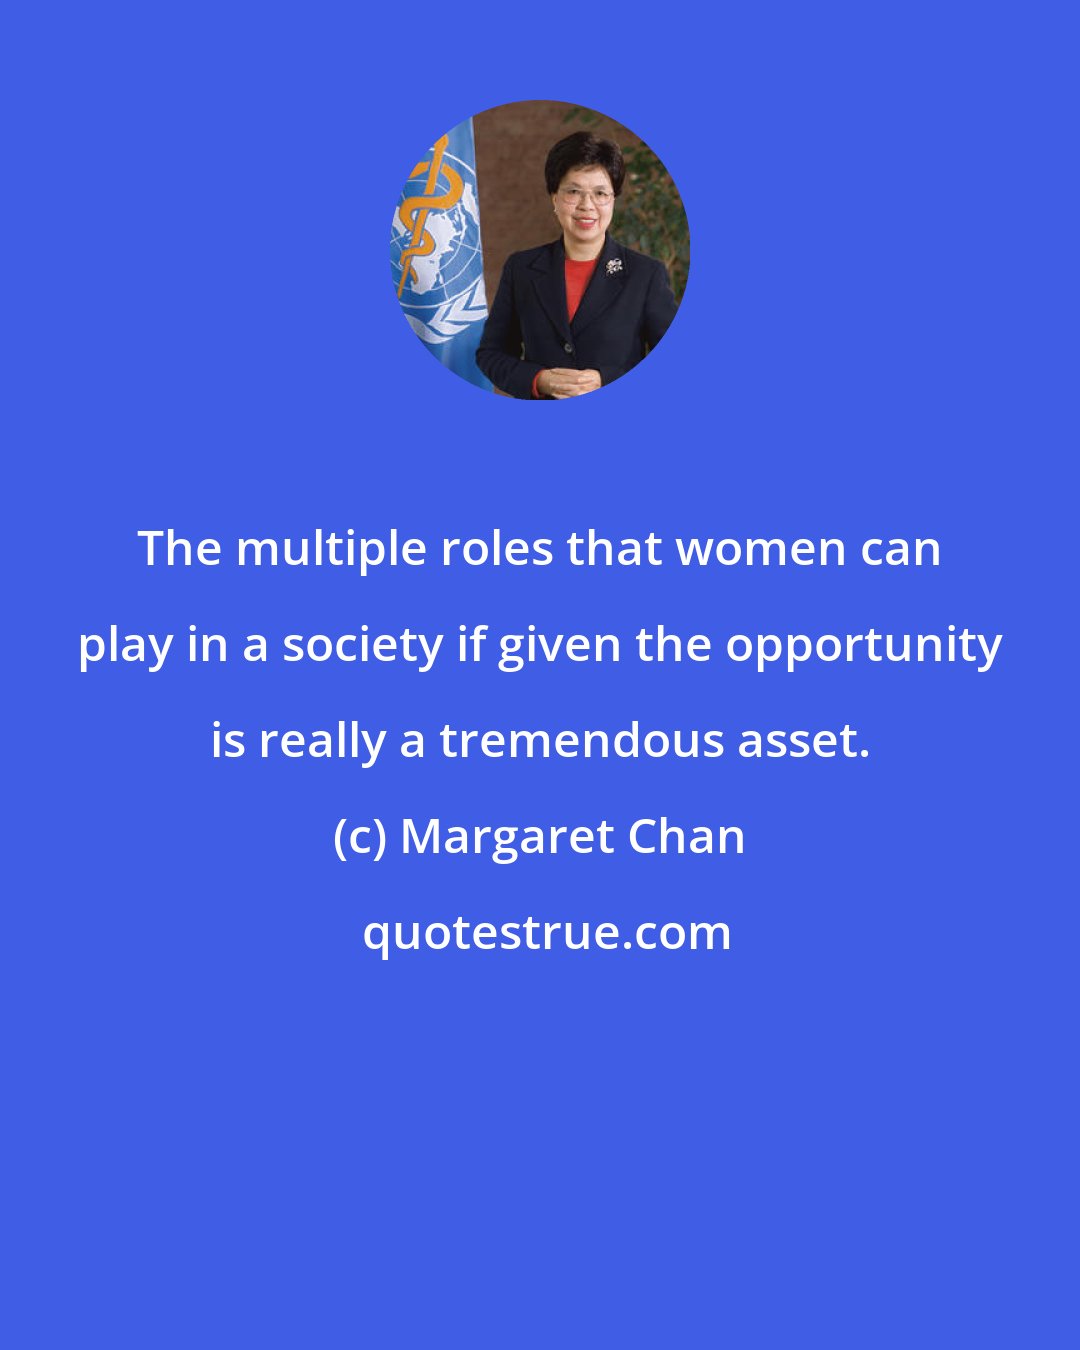 Margaret Chan: The multiple roles that women can play in a society if given the opportunity is really a tremendous asset.